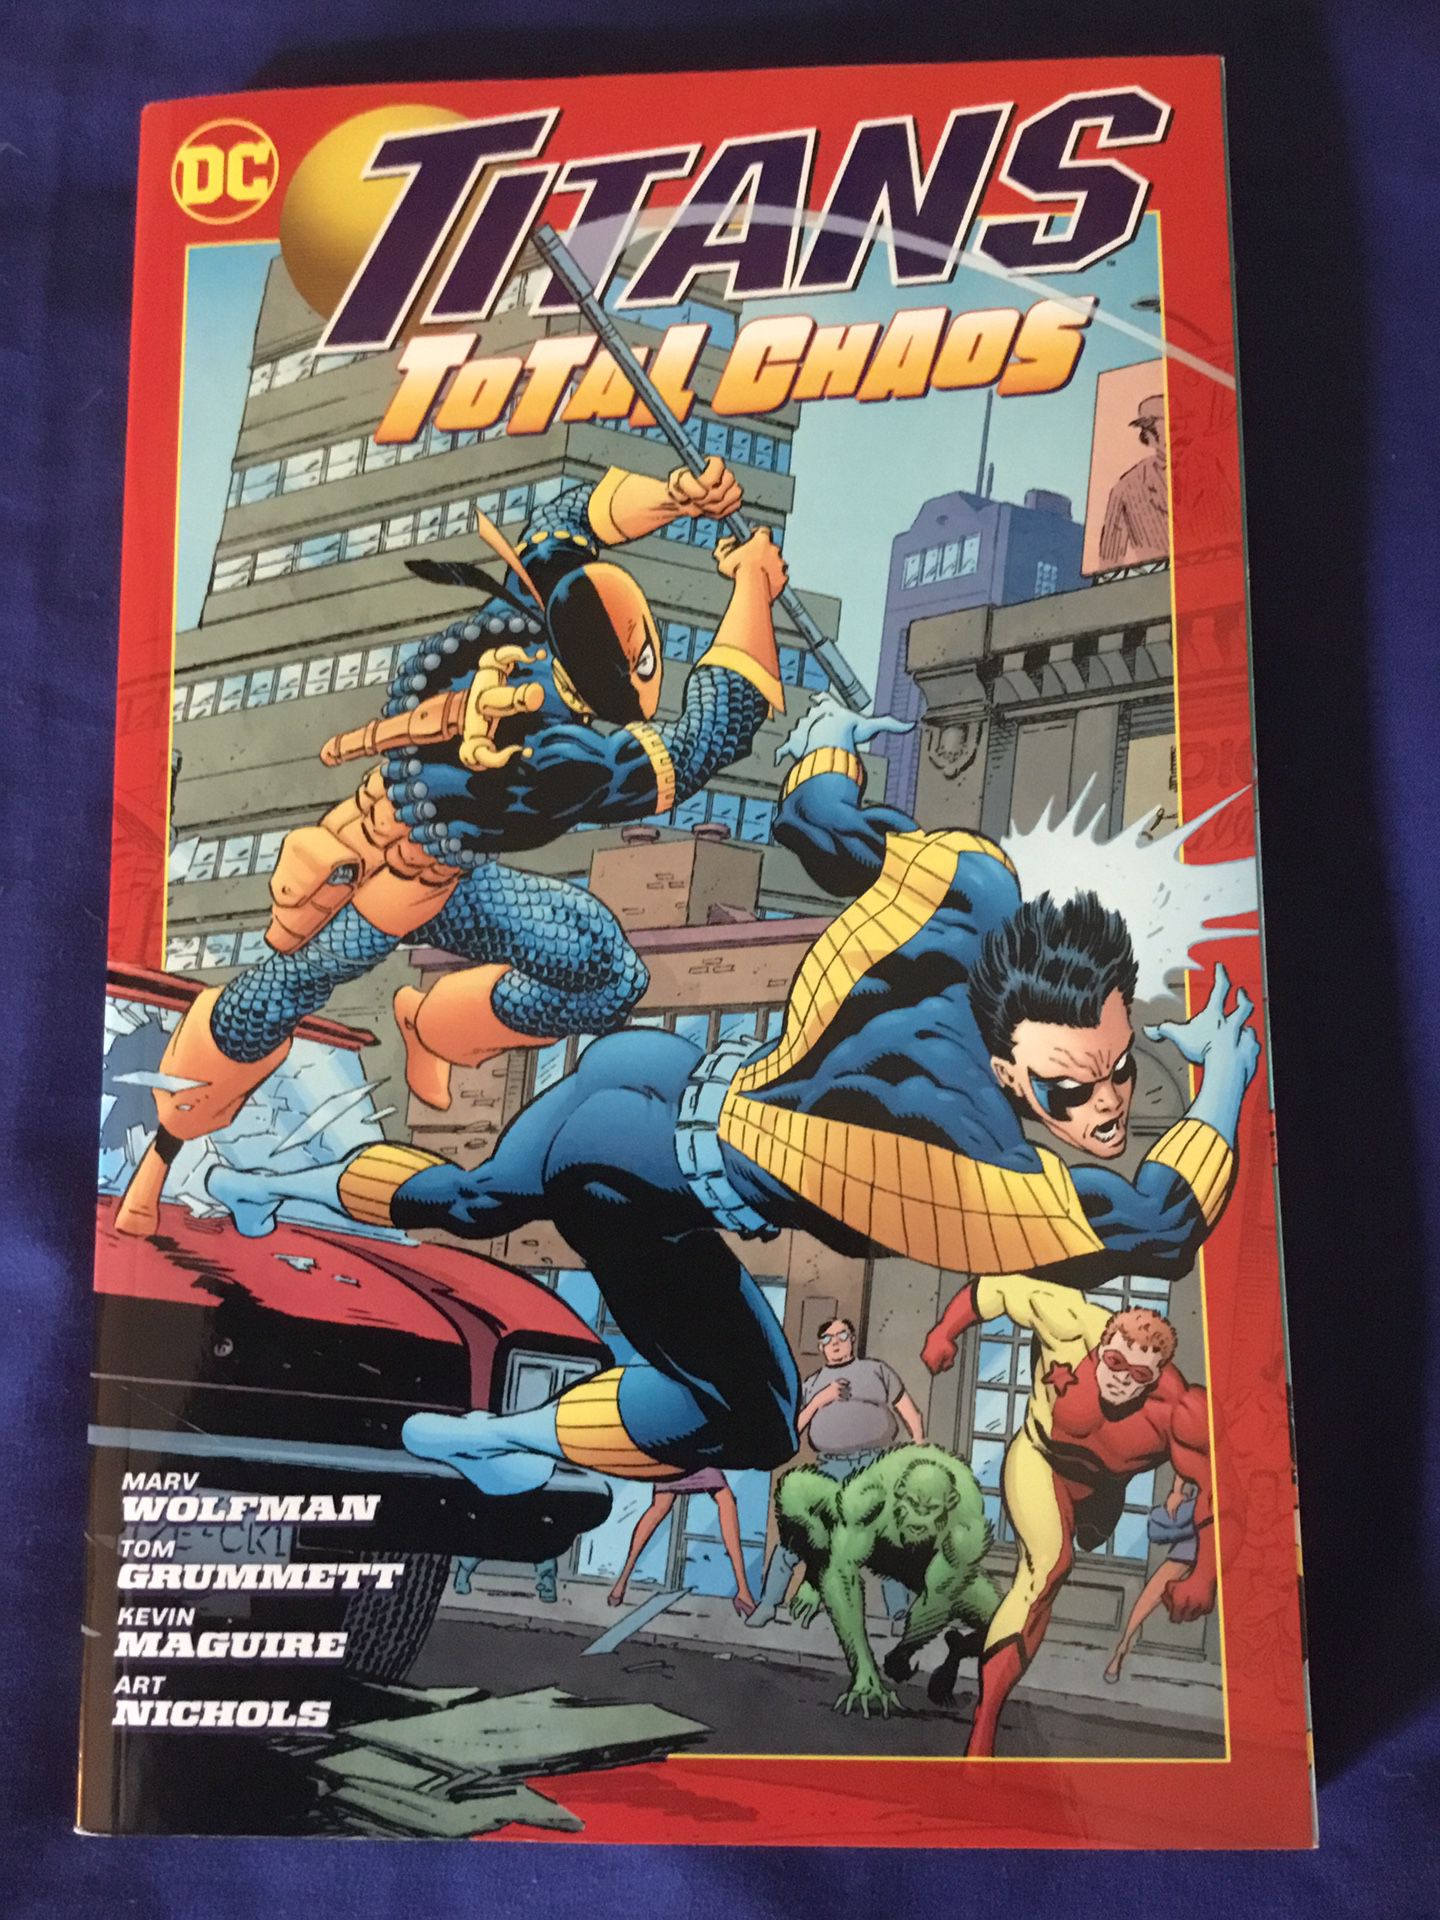 DC Comics: Titans Total Chaos by Marv Wolfman